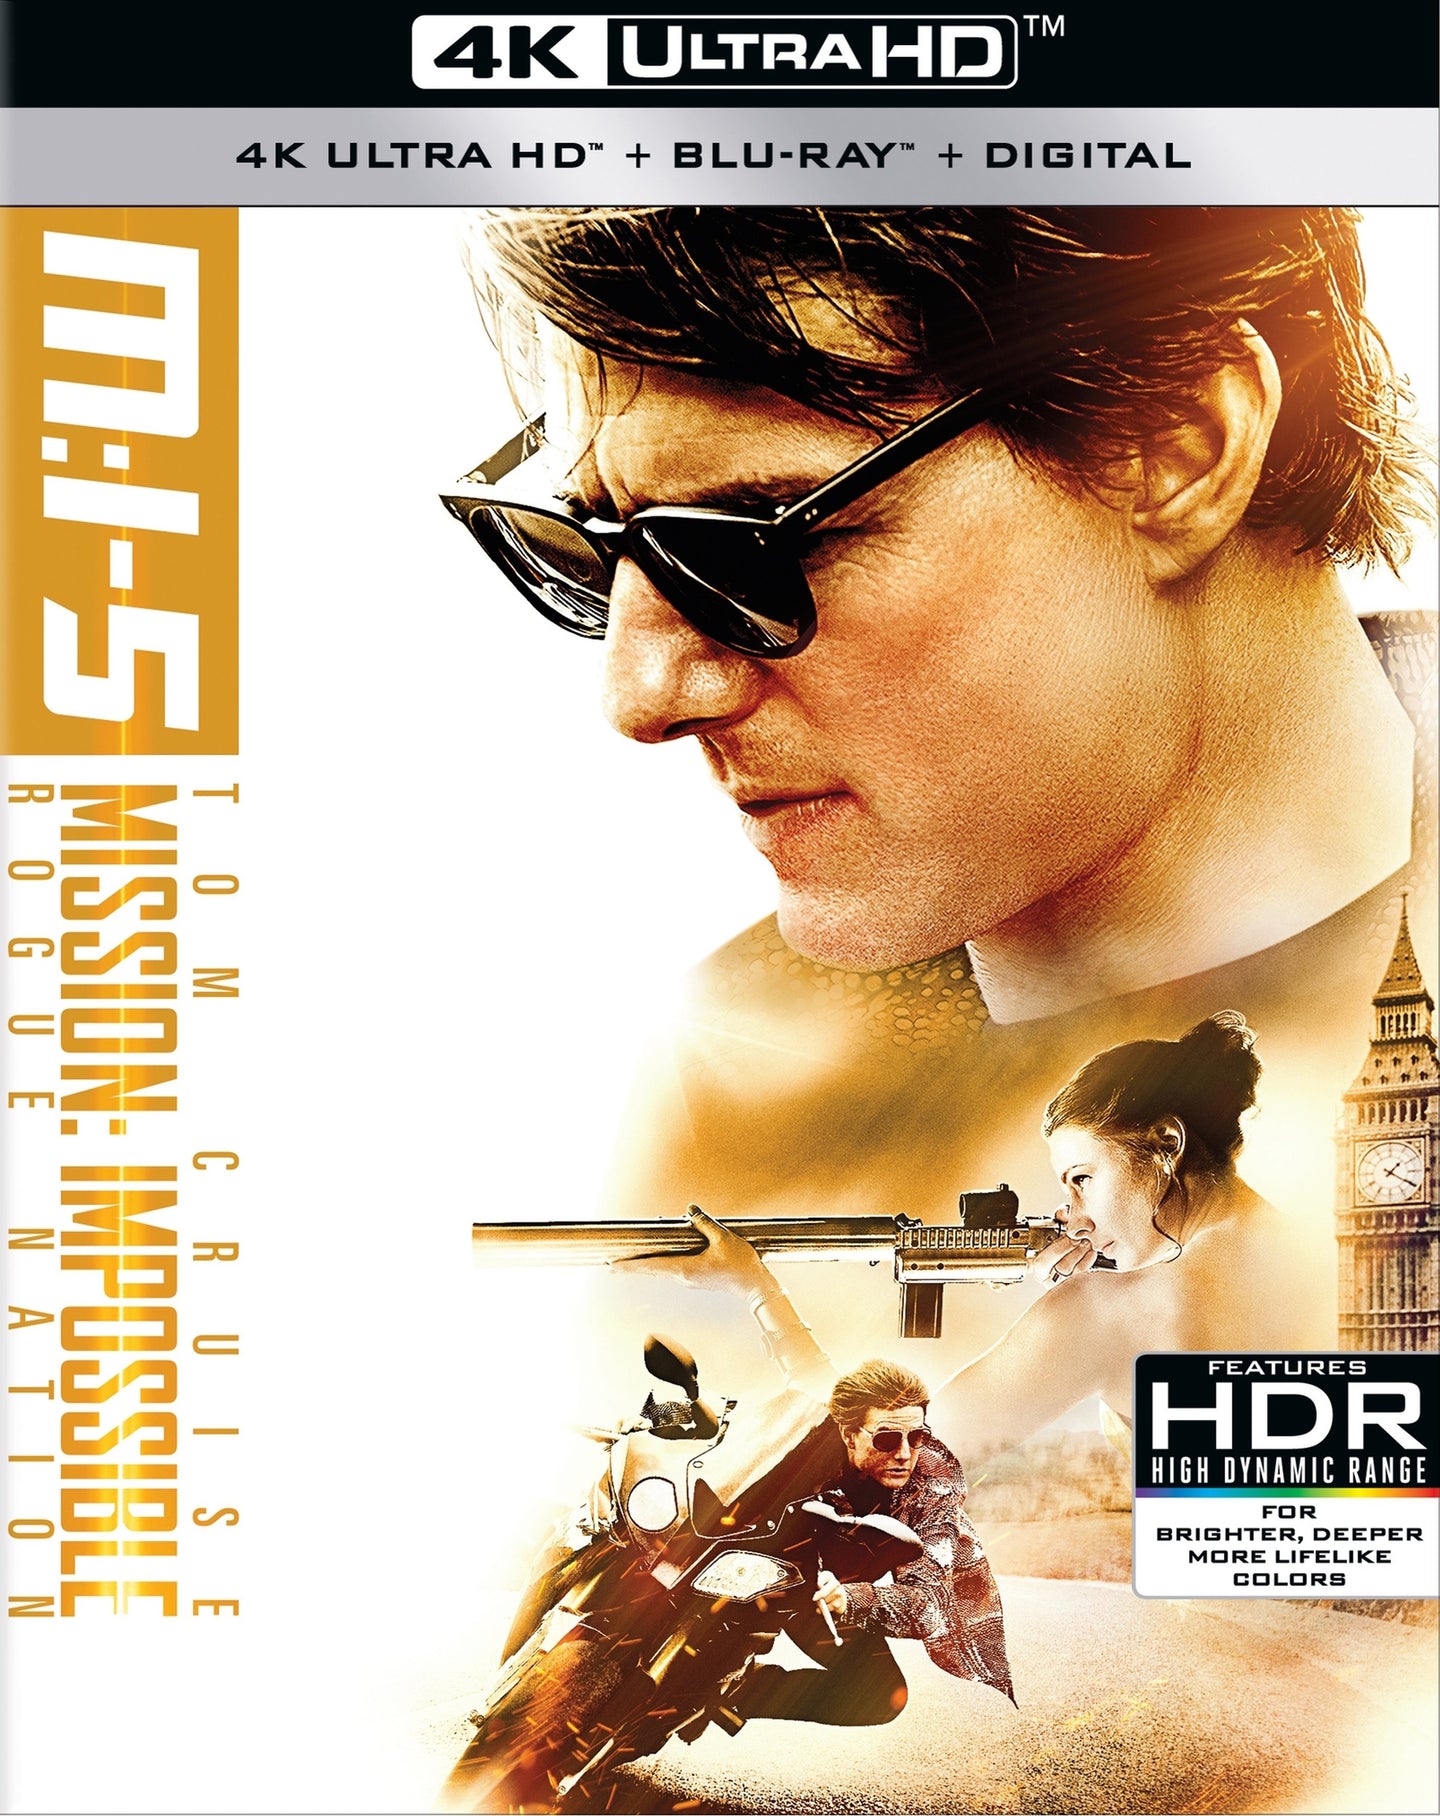 Mission: Impossible - Rogue Nation (2015) iTunes 4K redemption only